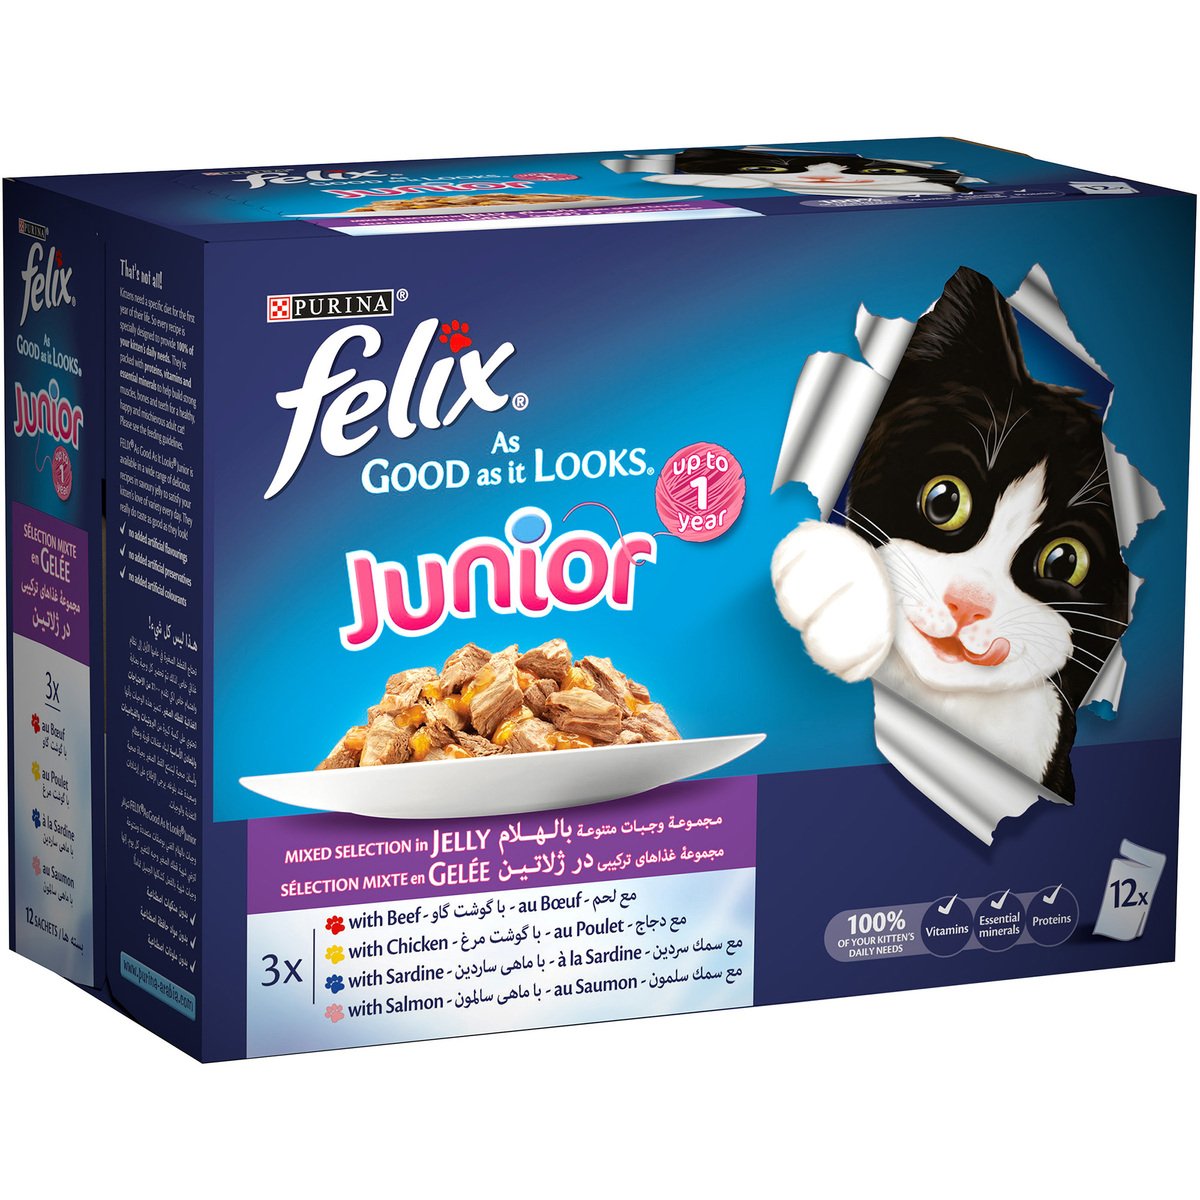 Purina Felix Junior Up to 1 Year Wet Cat Food 12 x 100 g